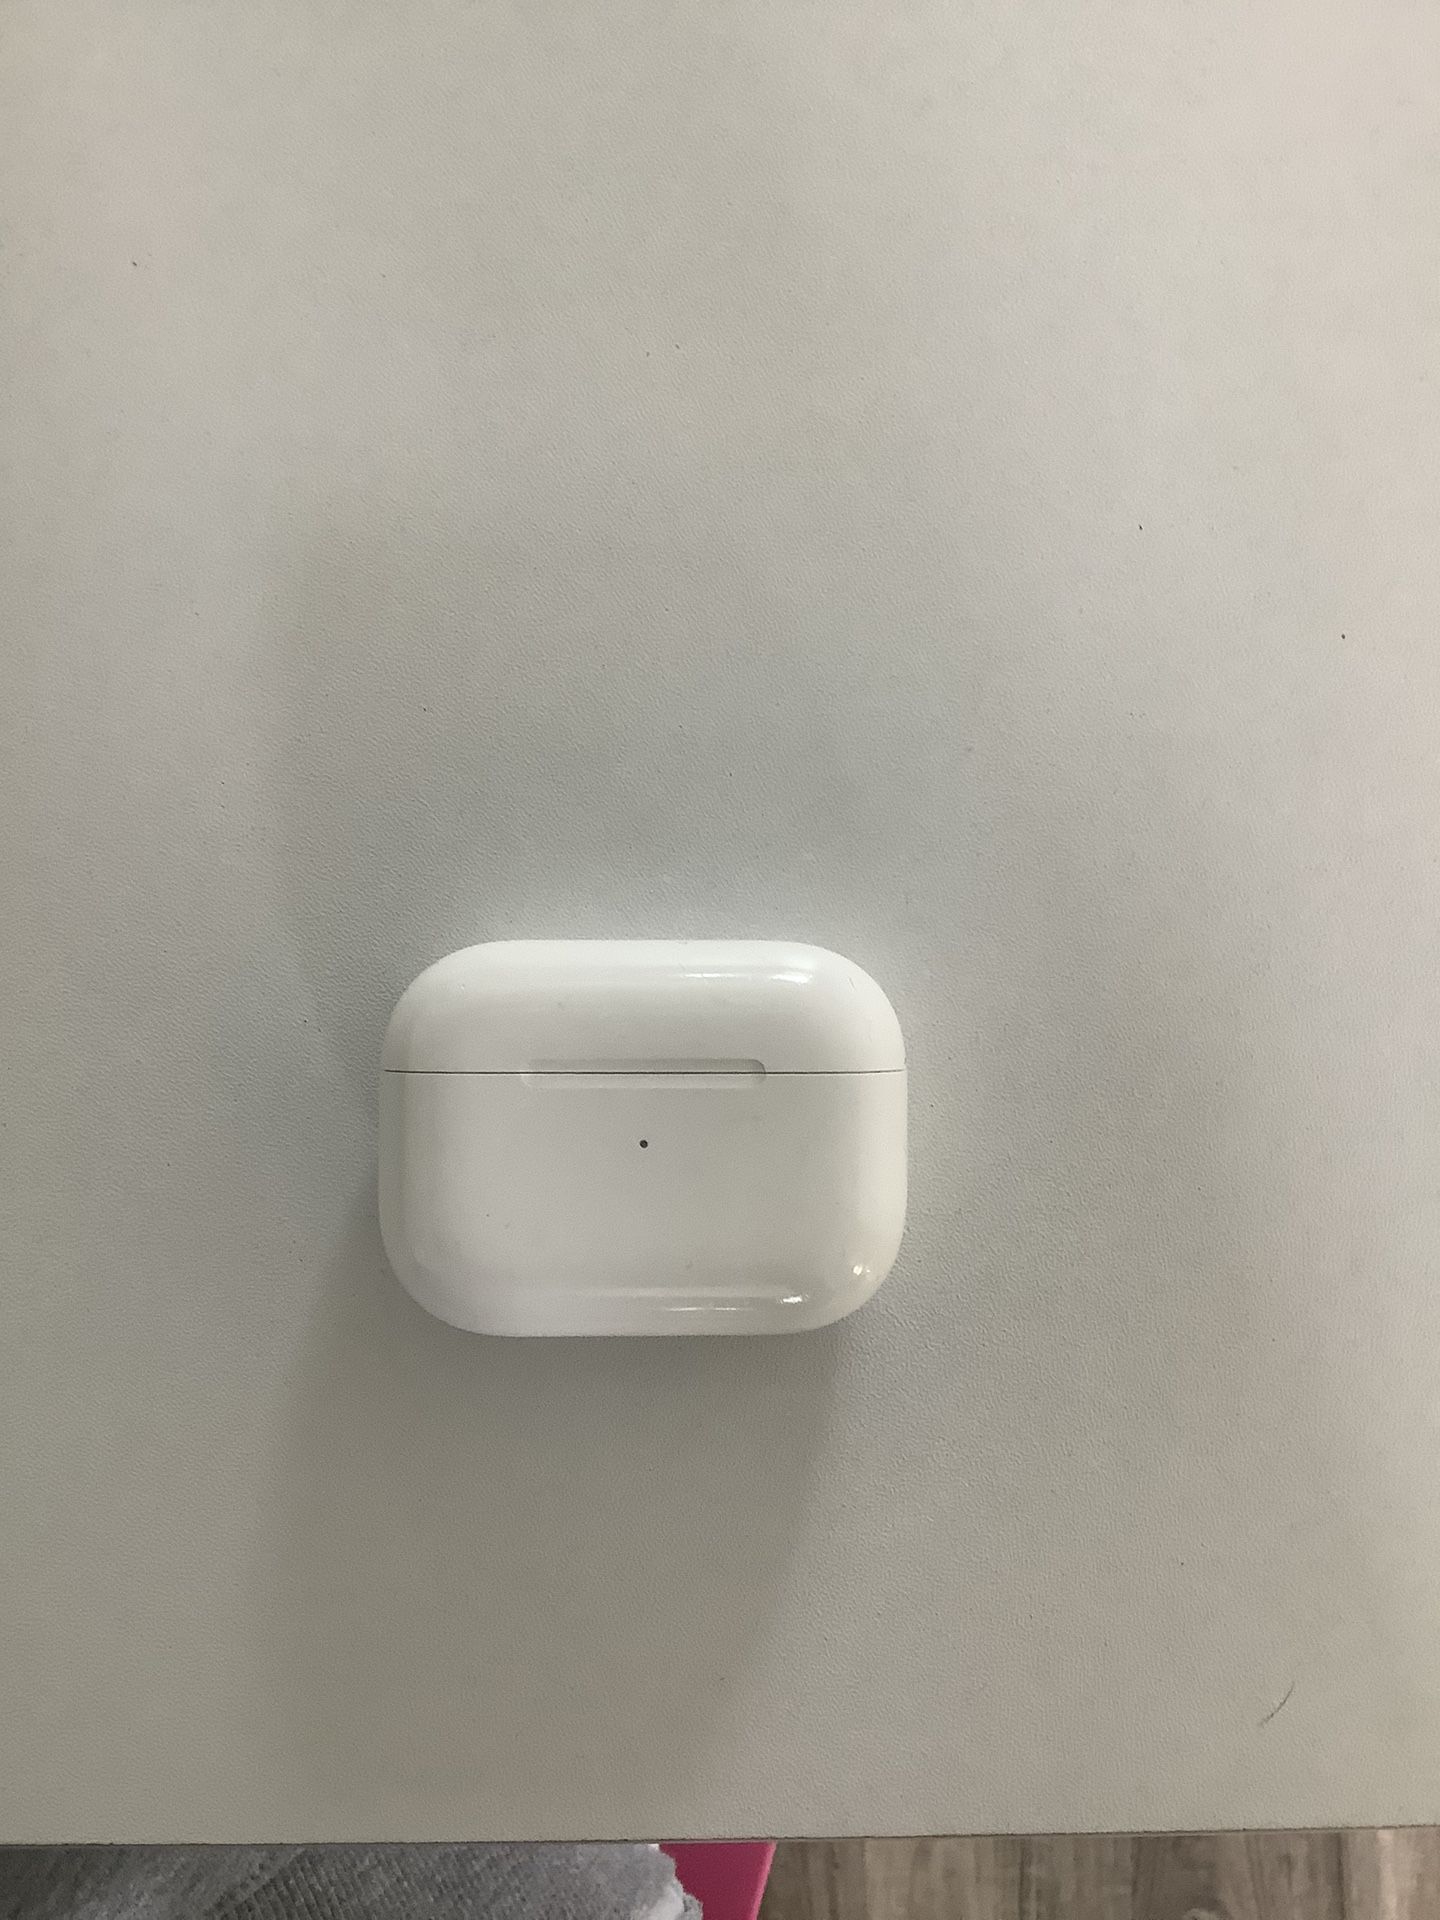 AirPods Pro (1st generation) charging case